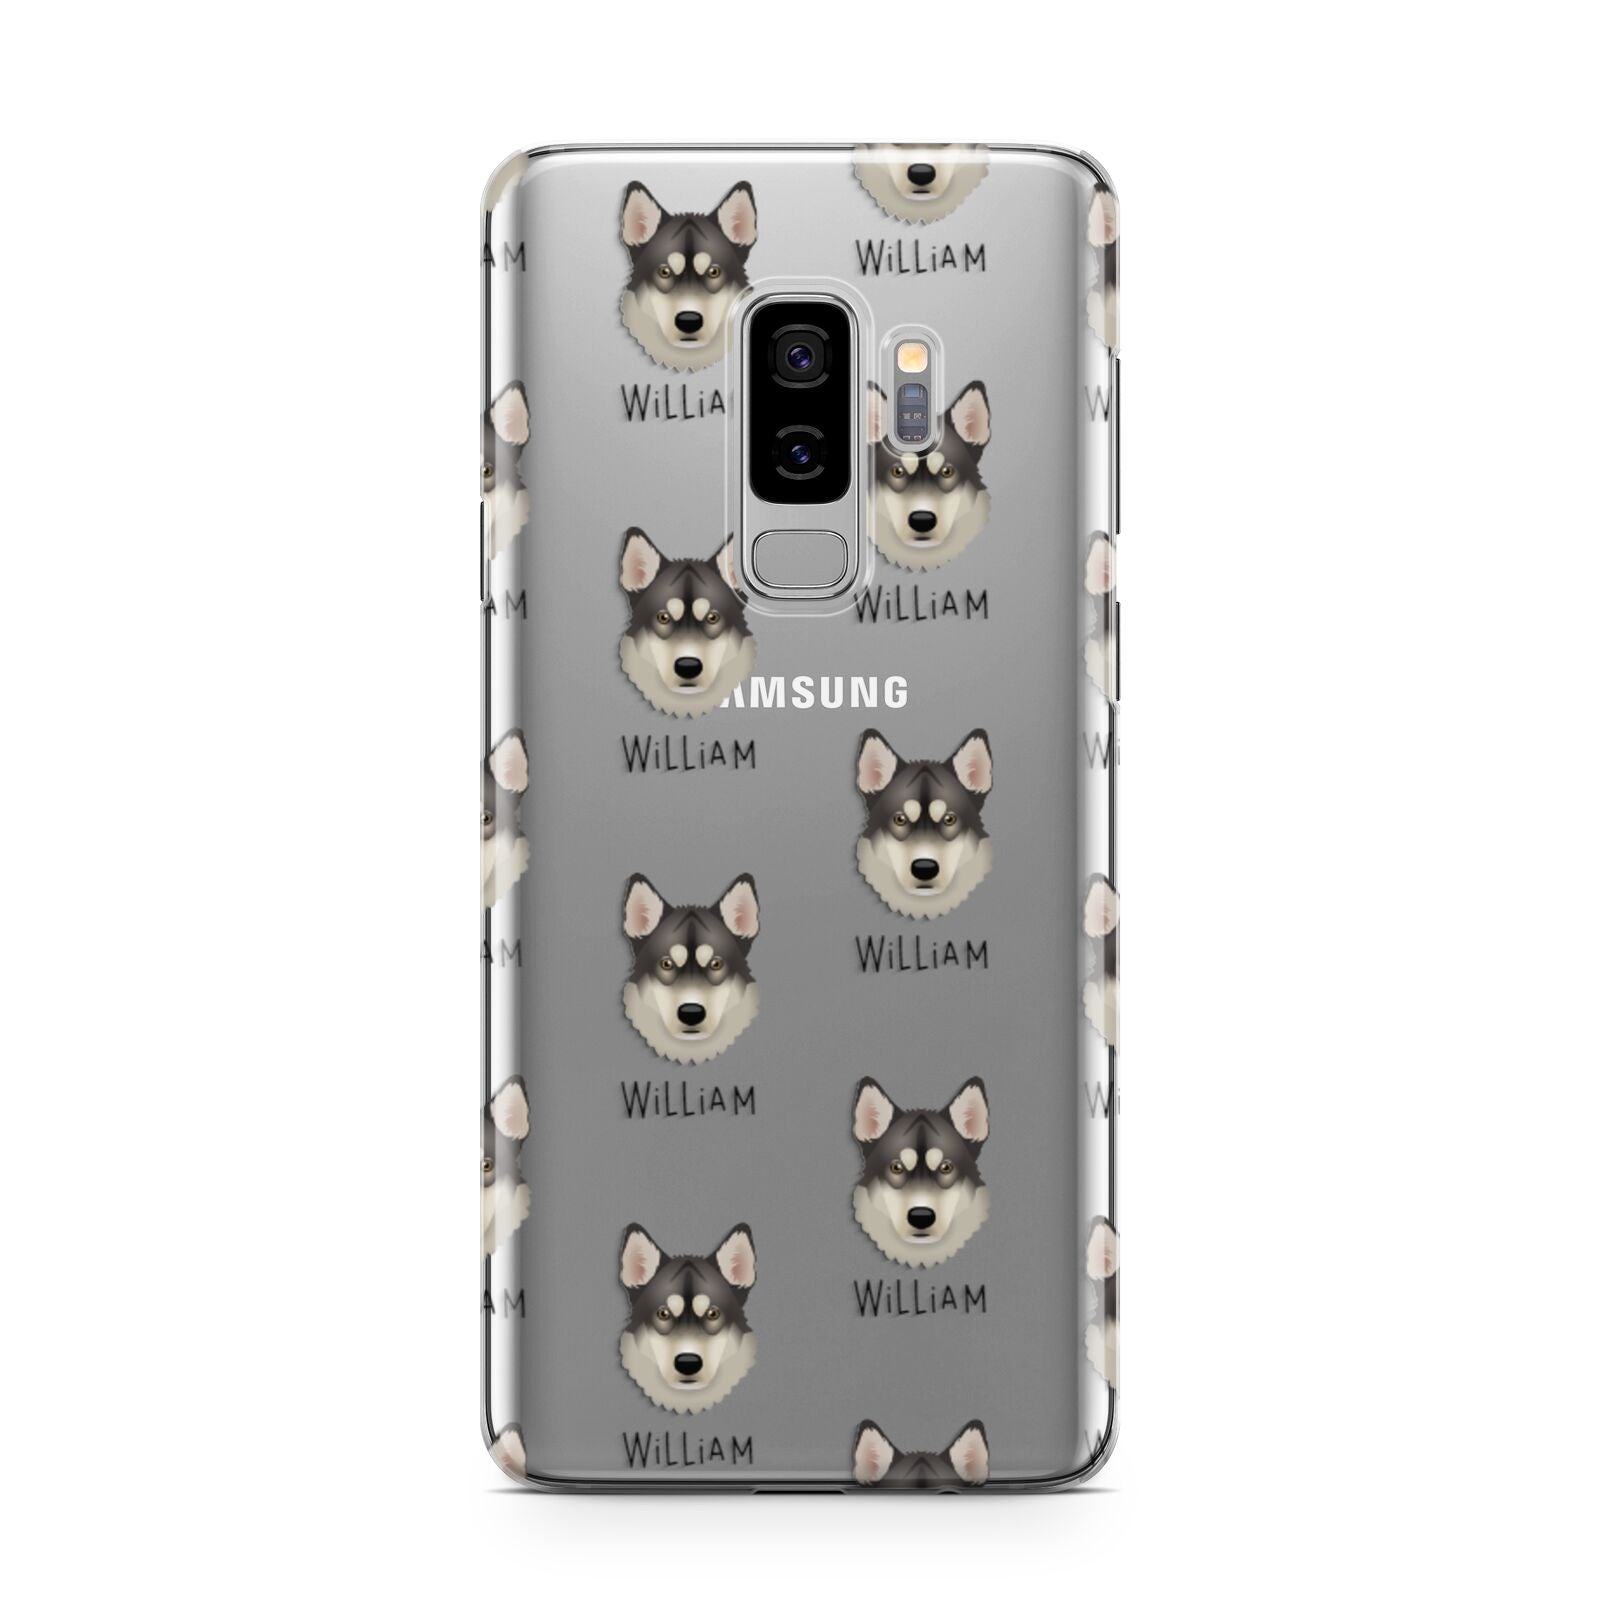 Tamaskan Icon with Name Samsung Galaxy S9 Plus Case on Silver phone